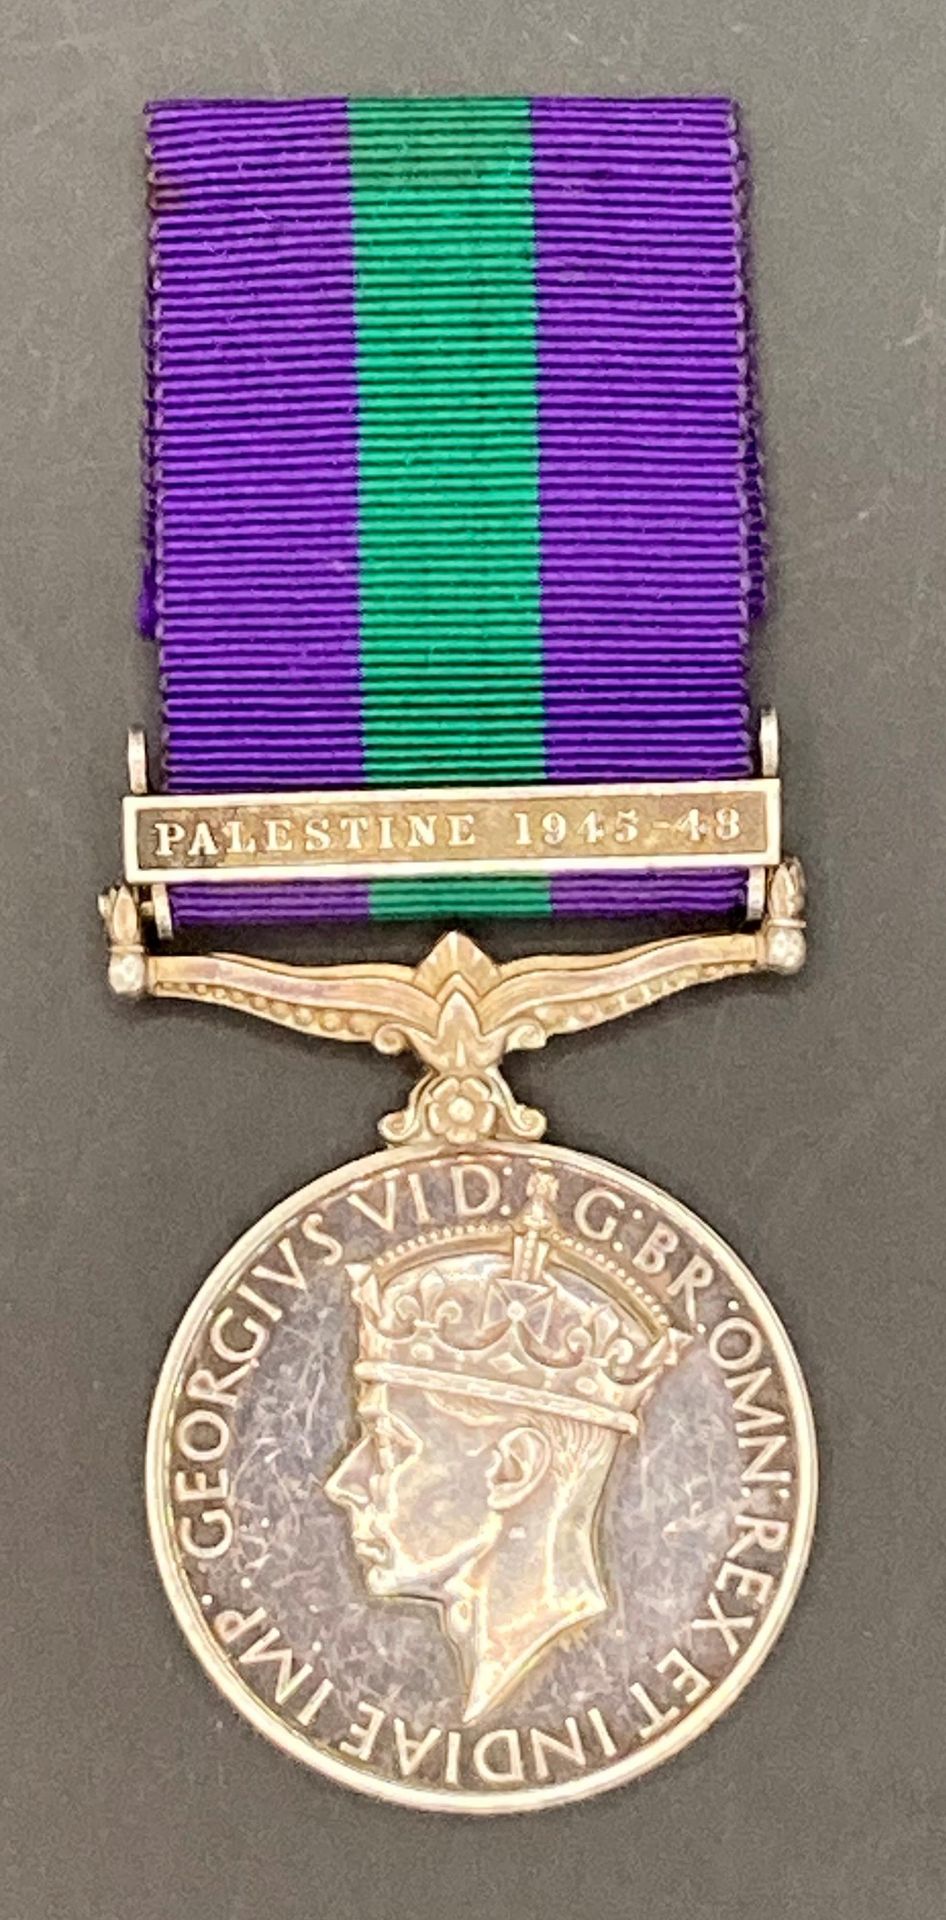 General Service Medal 1918-1962 with Palestine 1945-1948 clasp and ribbon to 19126128 Bdr GB